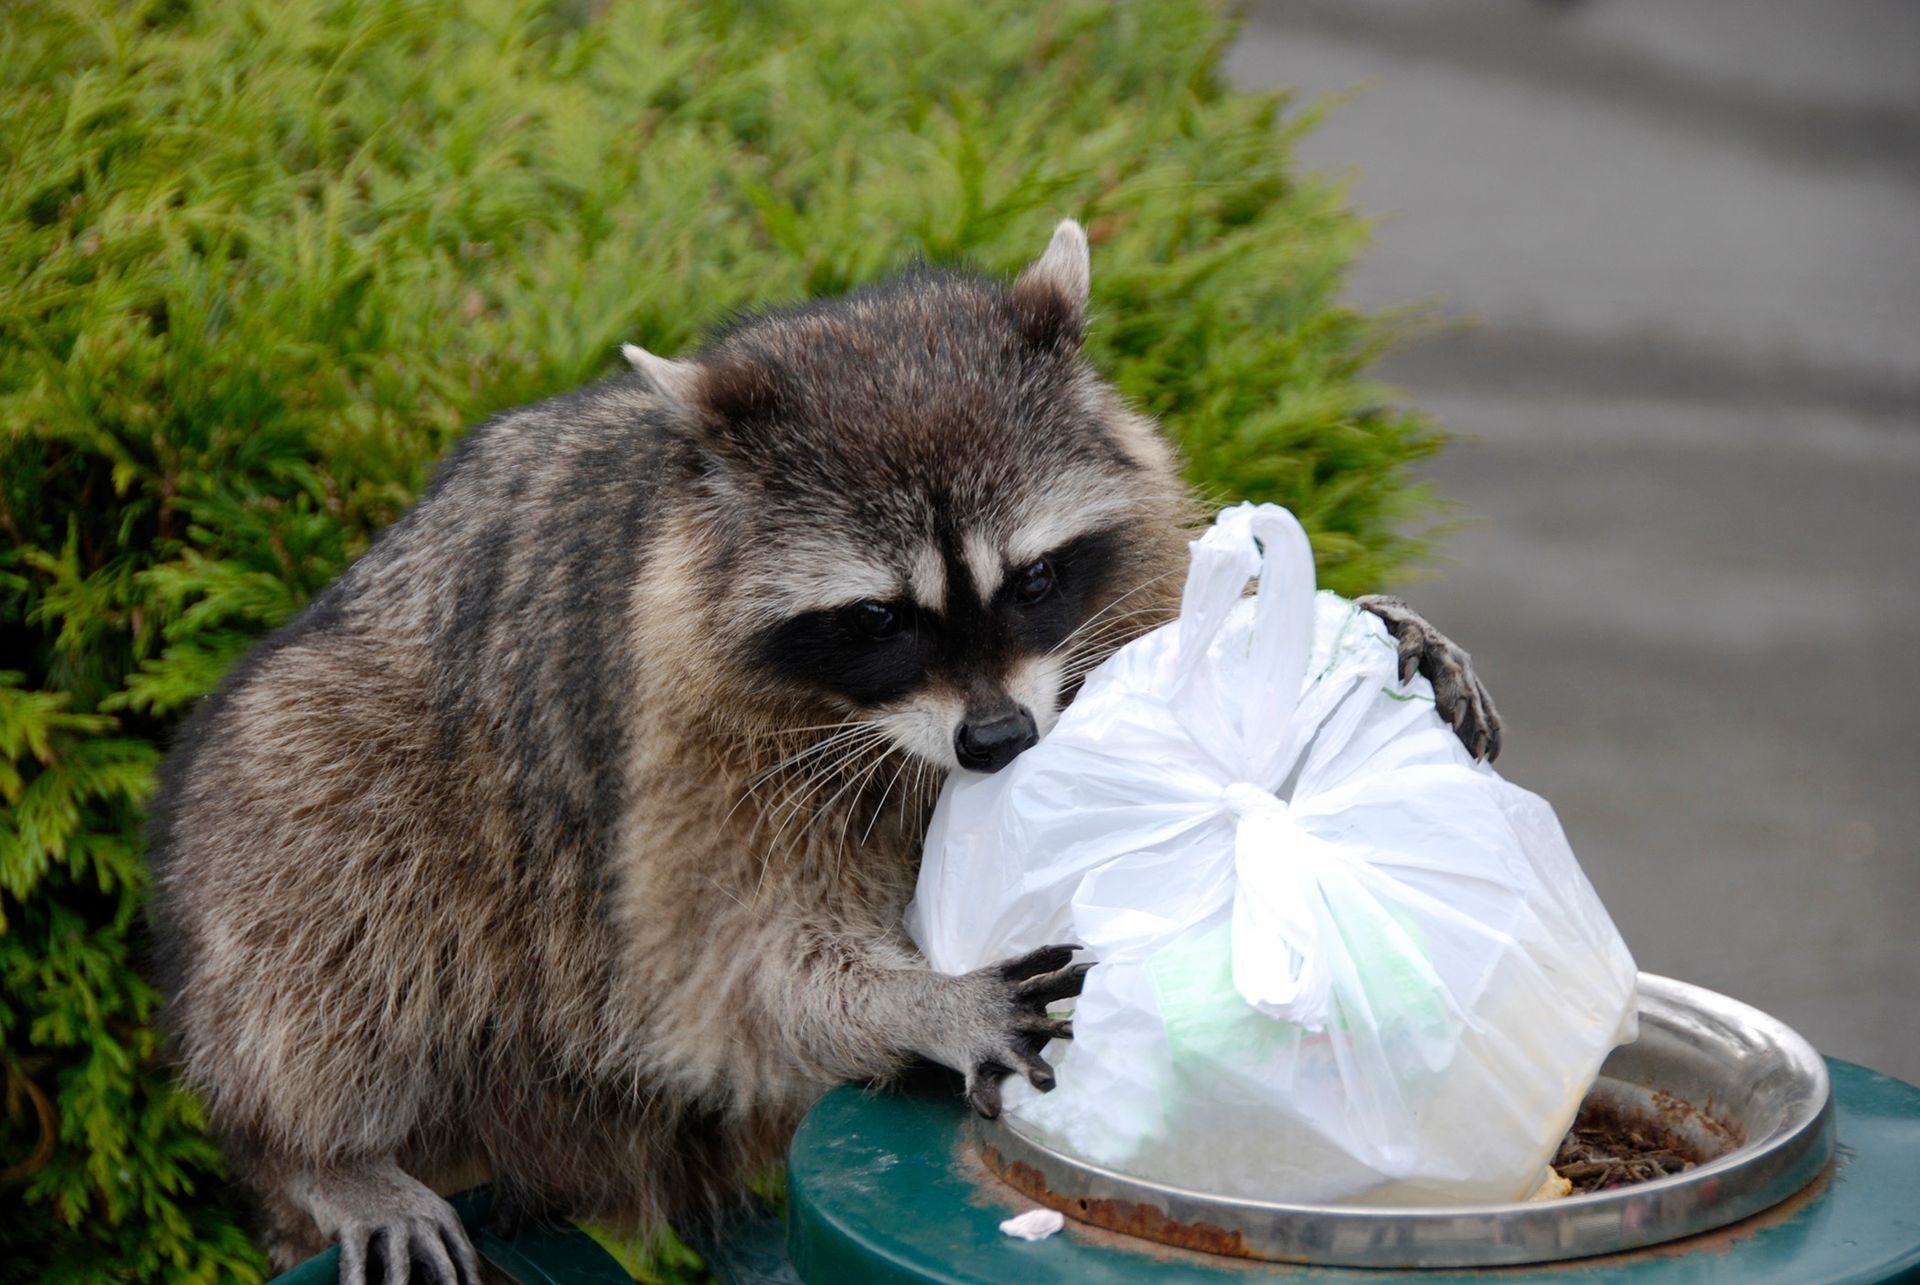 A raccoon is eating a plastic bag from a trash can.